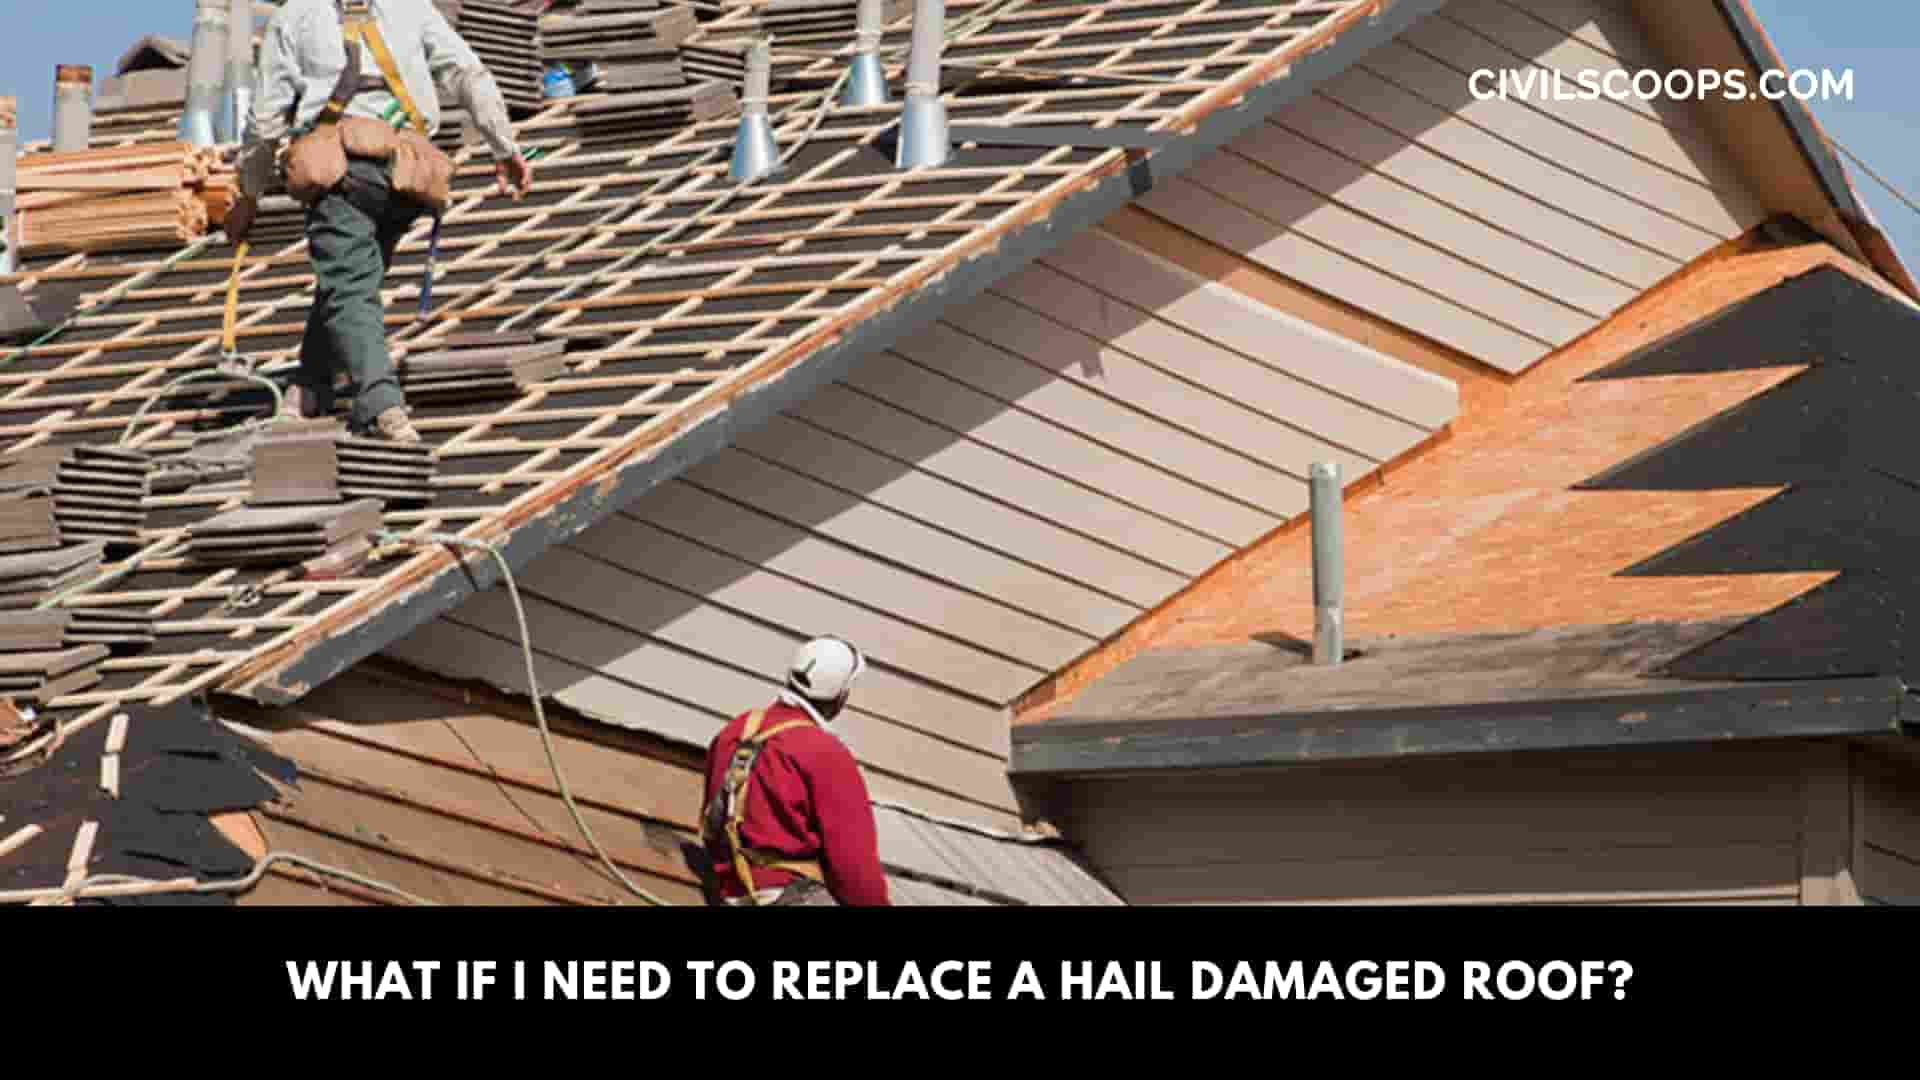 What If I Need to Replace a Hail Damaged Roof?